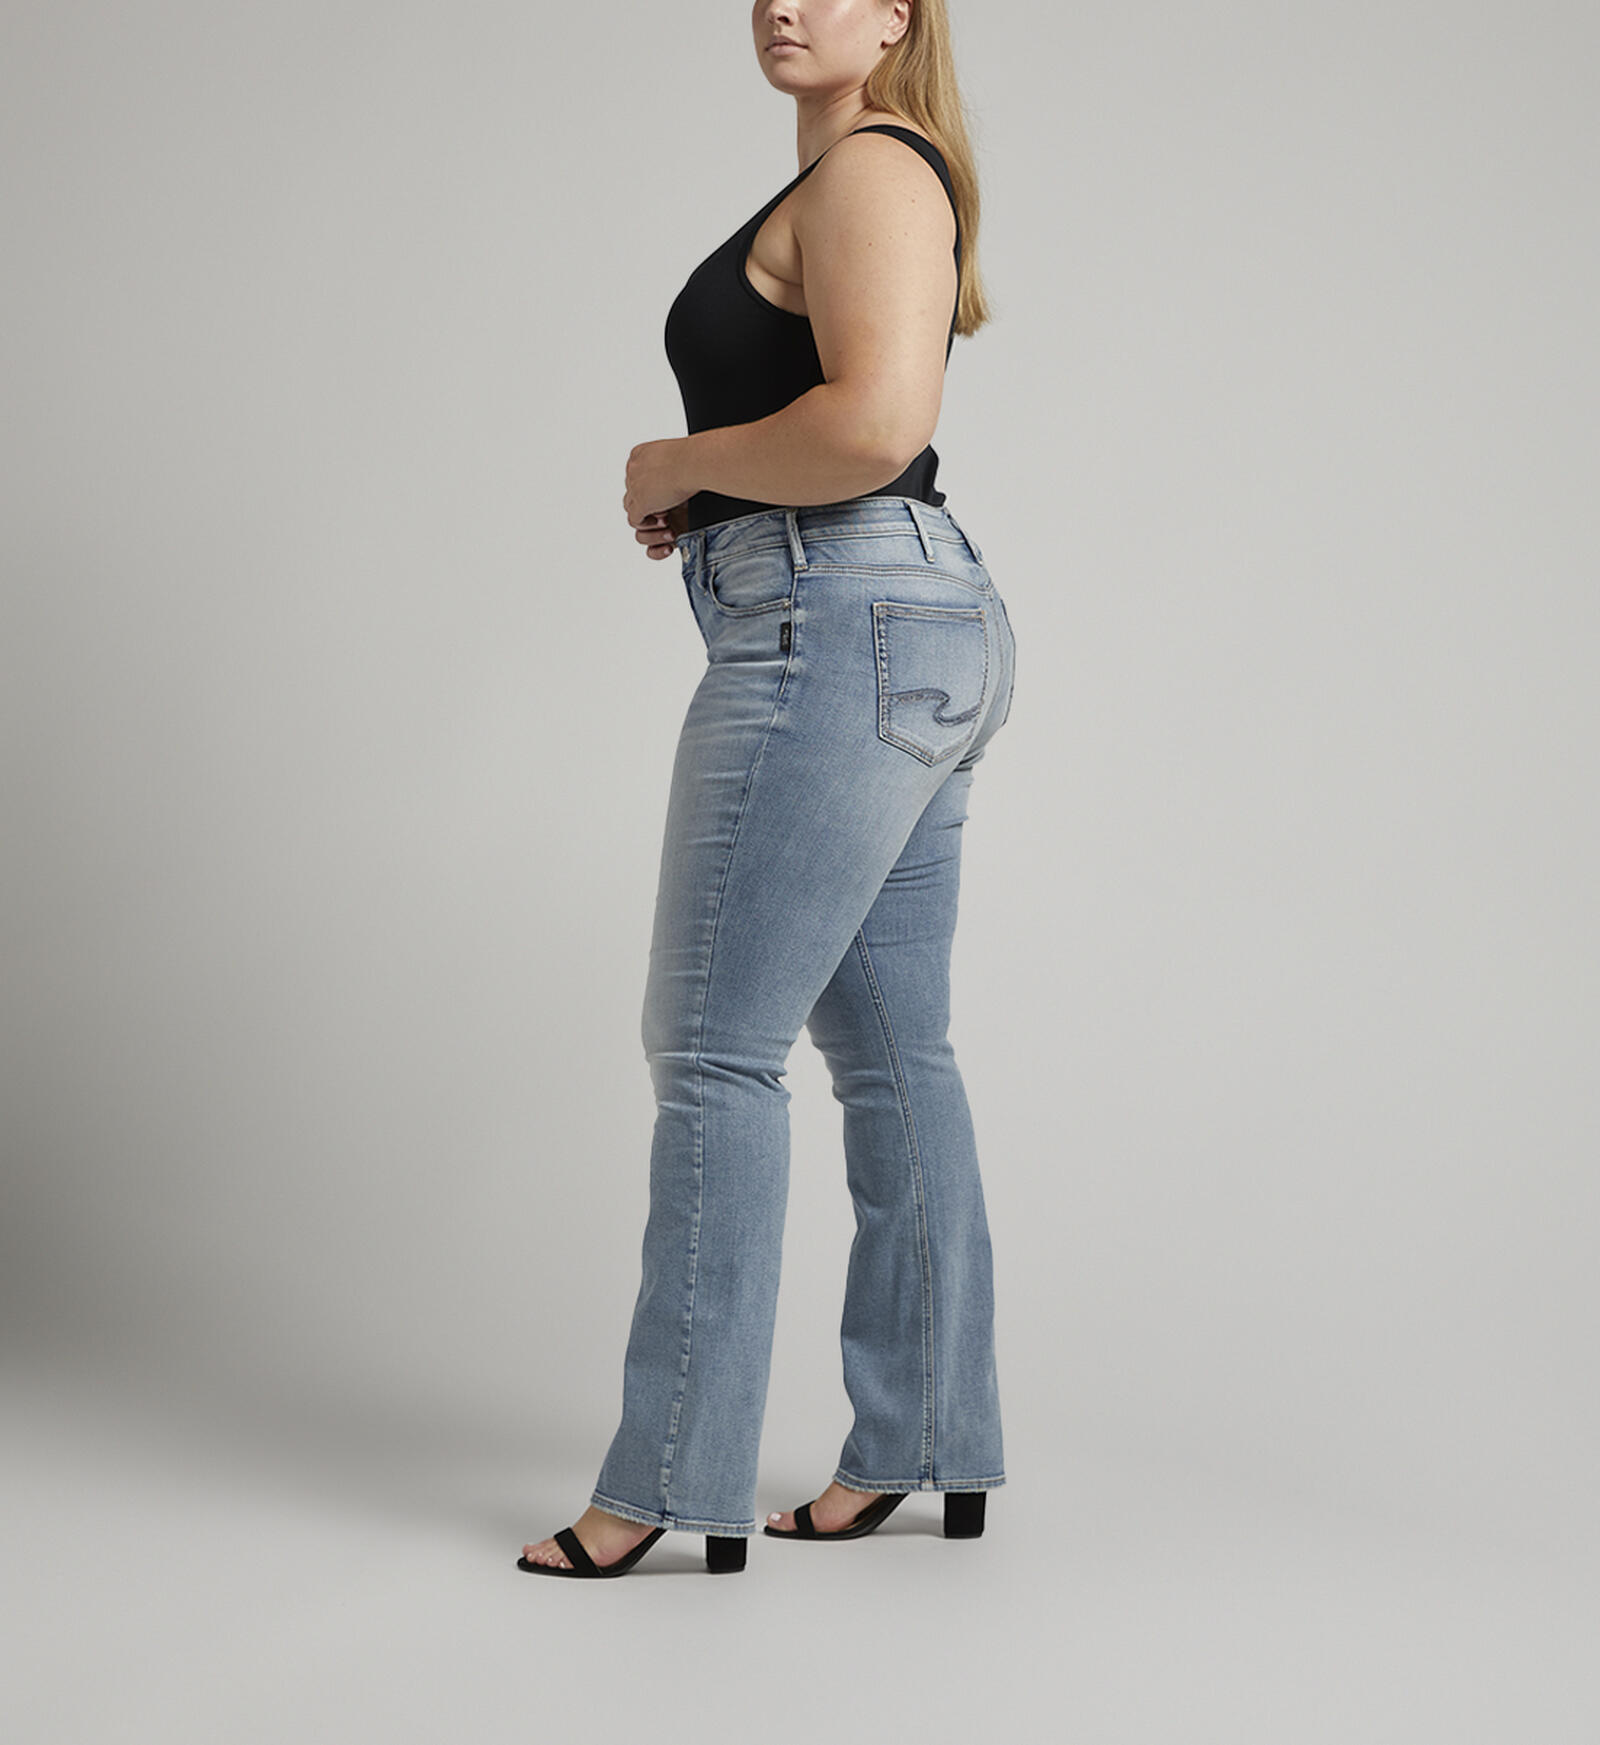 Buy Suki Mid Rise Slim Bootcut Jeans Plus Size for CAD 70.00